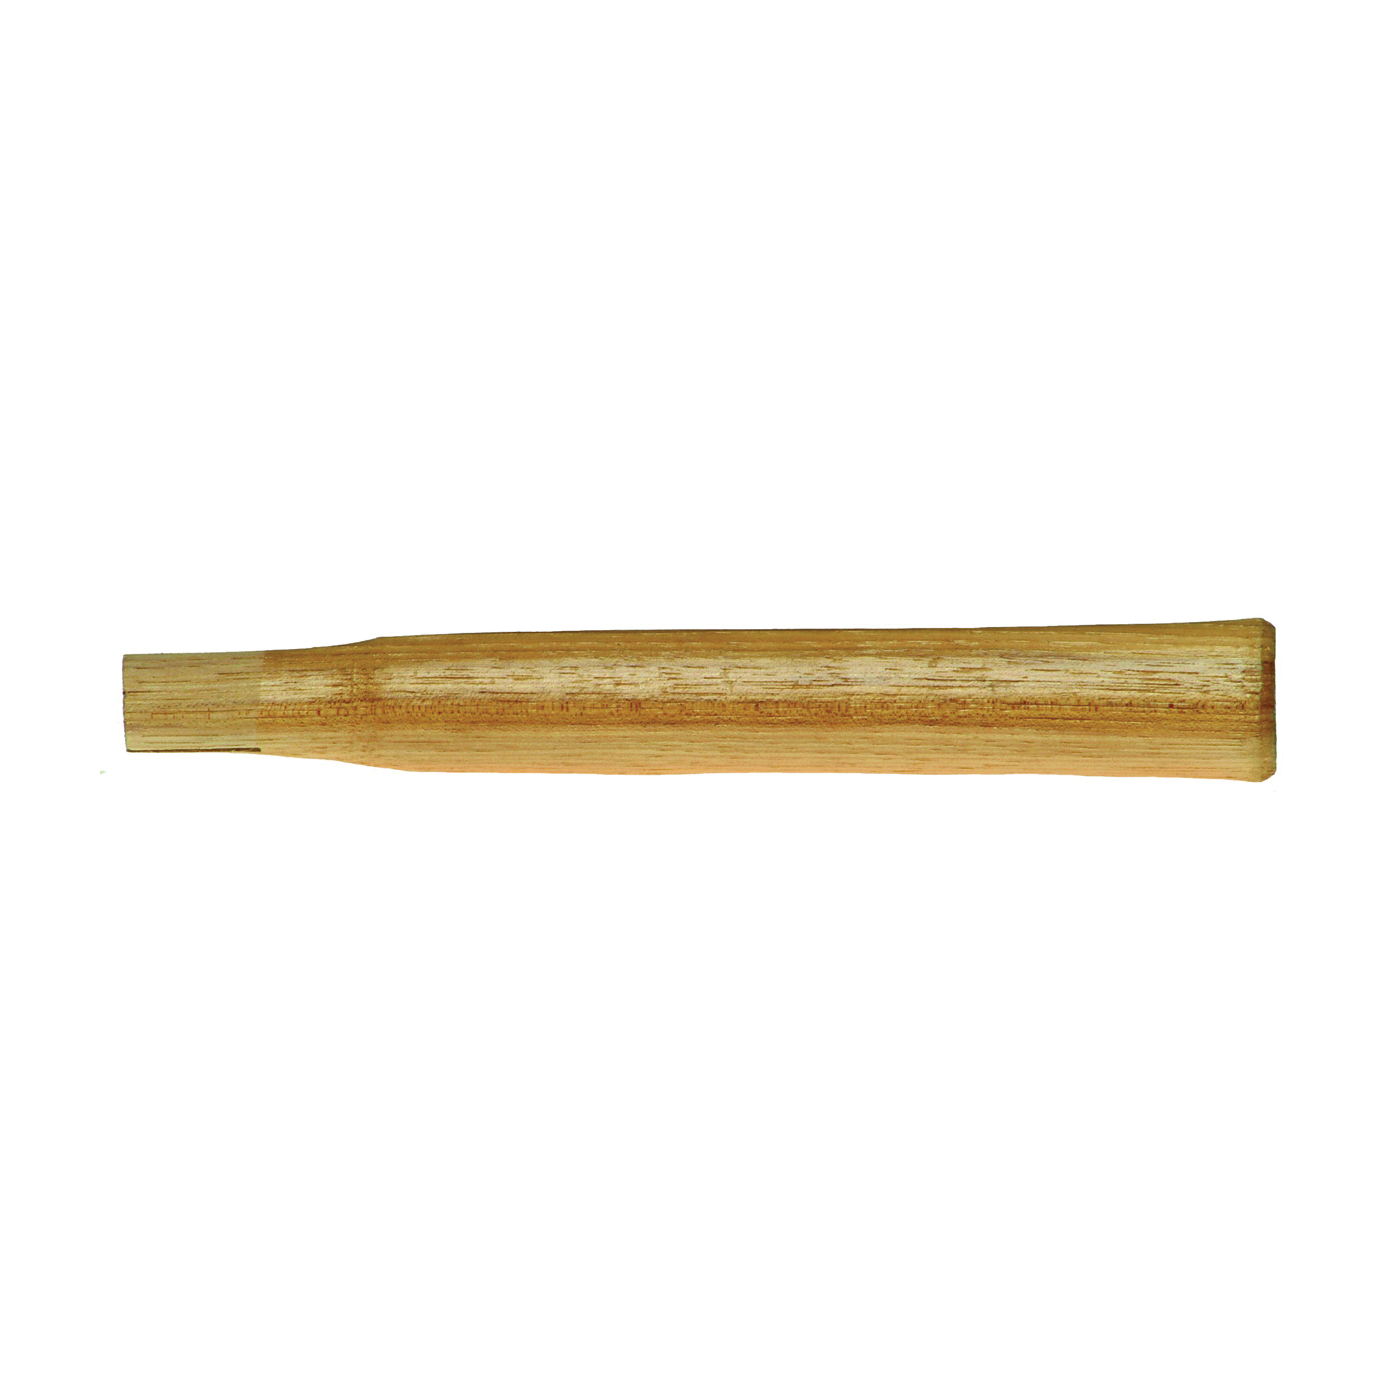 66004 Hammer Handle, 12 in L, Wood, For: 2 to 4 lb Hammers